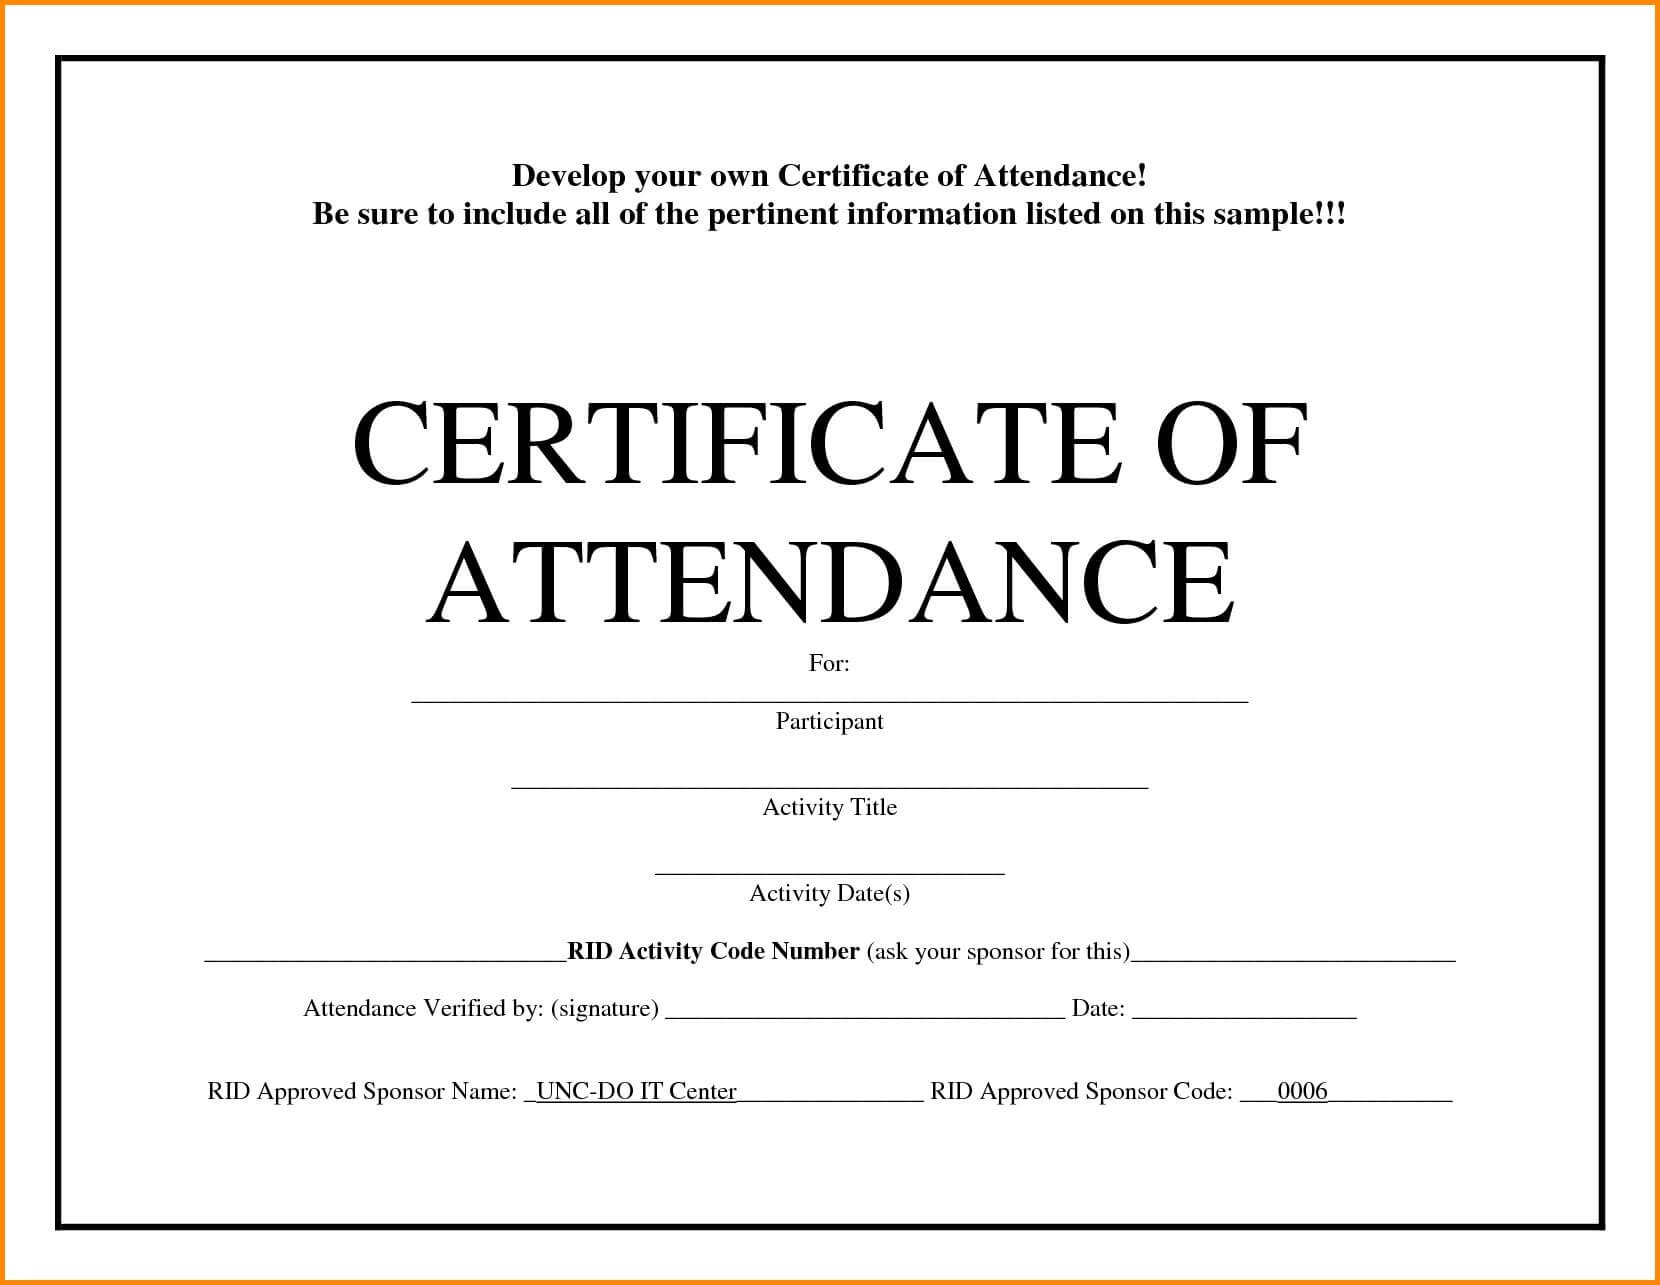 Conference Attendance Certificate Samples Fresh Template Throughout Certificate Of Attendance Conference Template